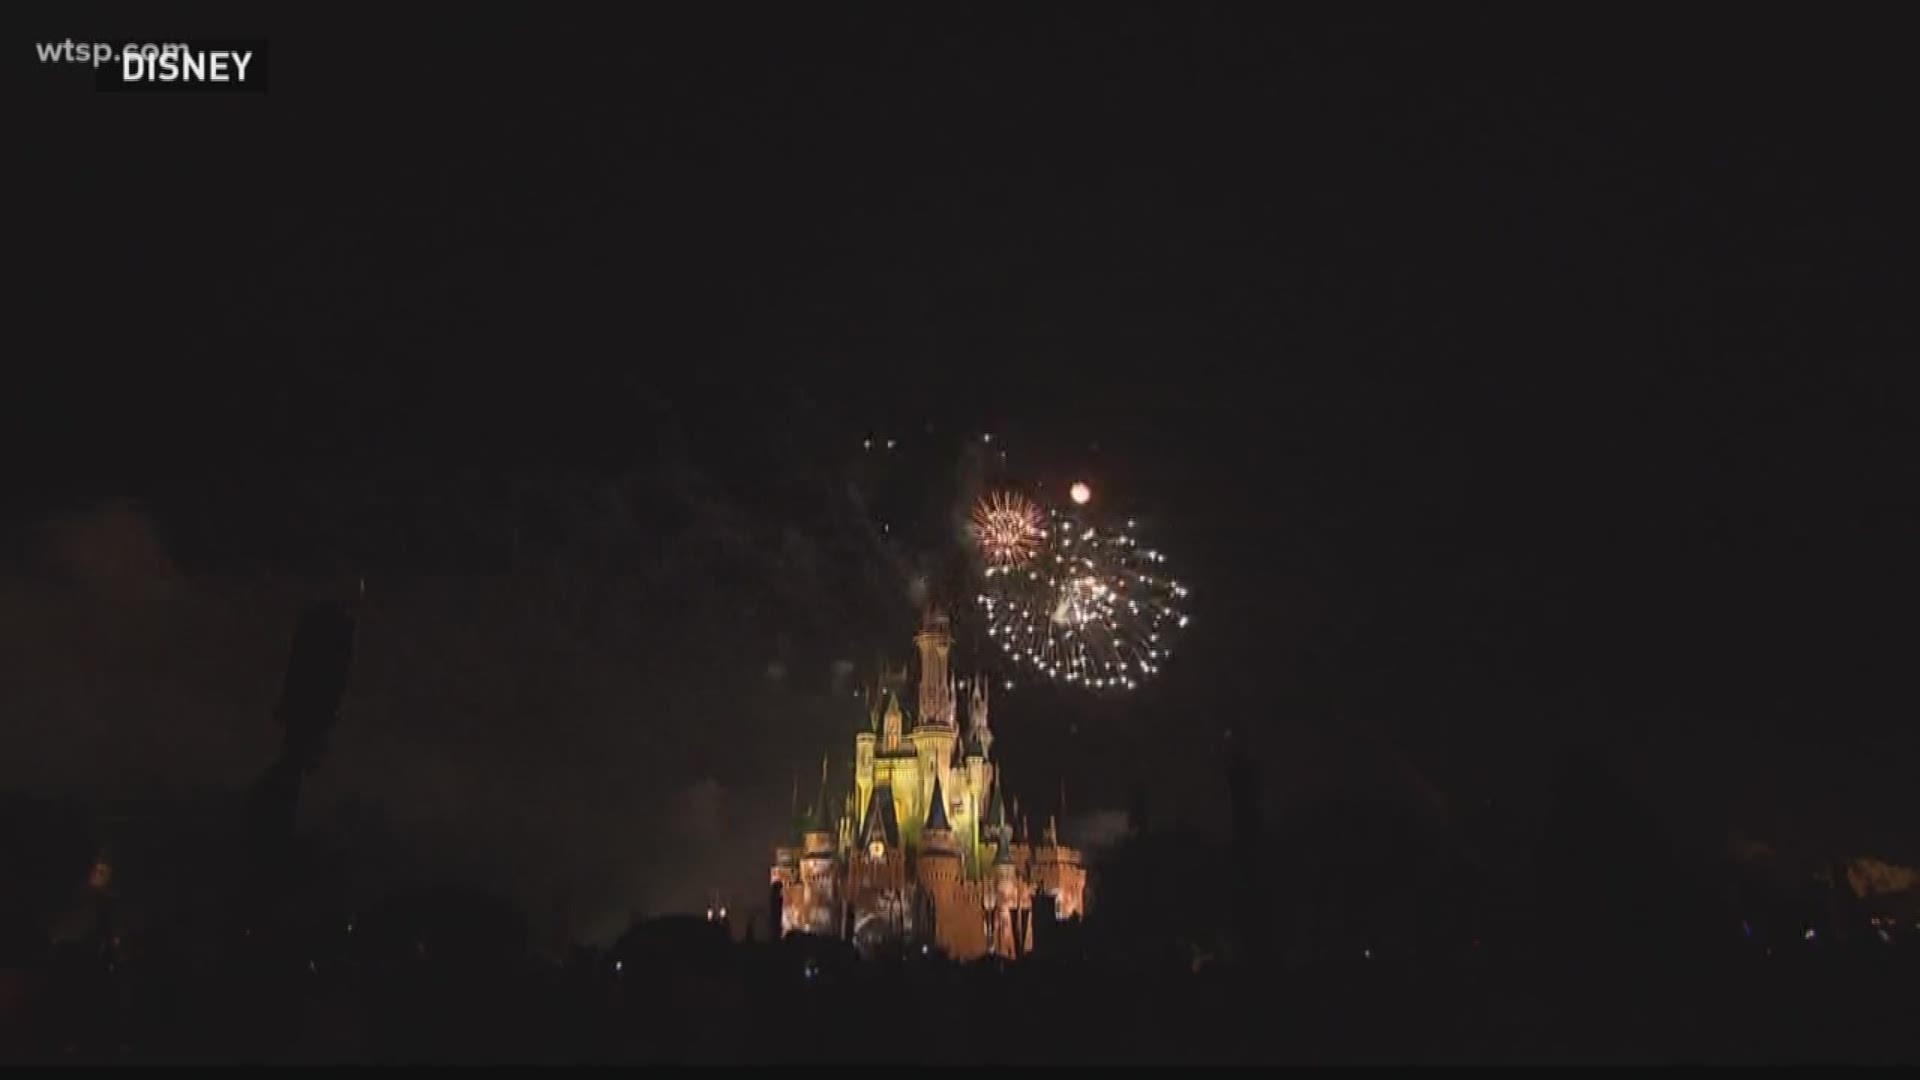 A Disney research lab has created a way for visually-impaired people to experience fireworks.